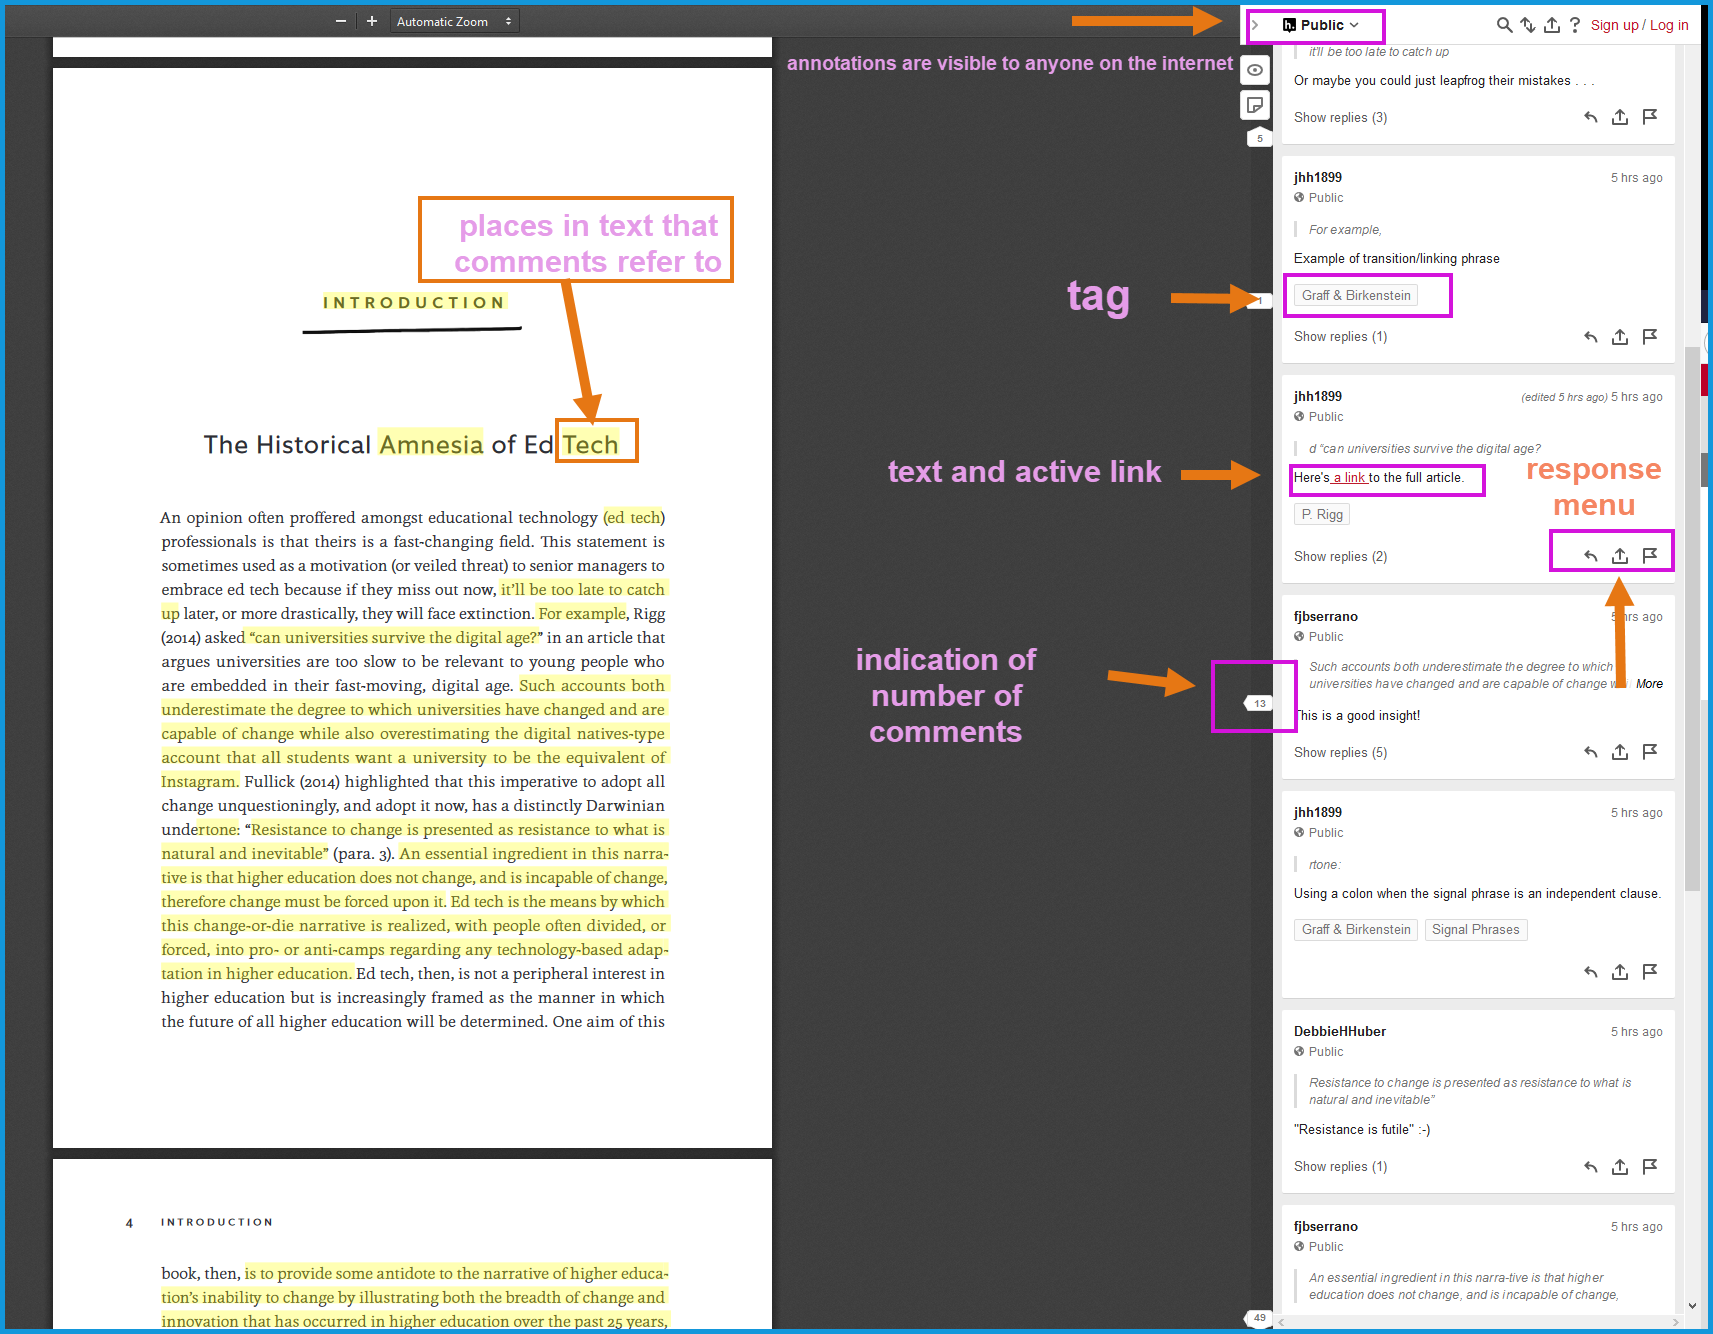 This pictures shows an annotated page of a book to help viewers understand how comments can contain text, active links, how they are tagged, etc.